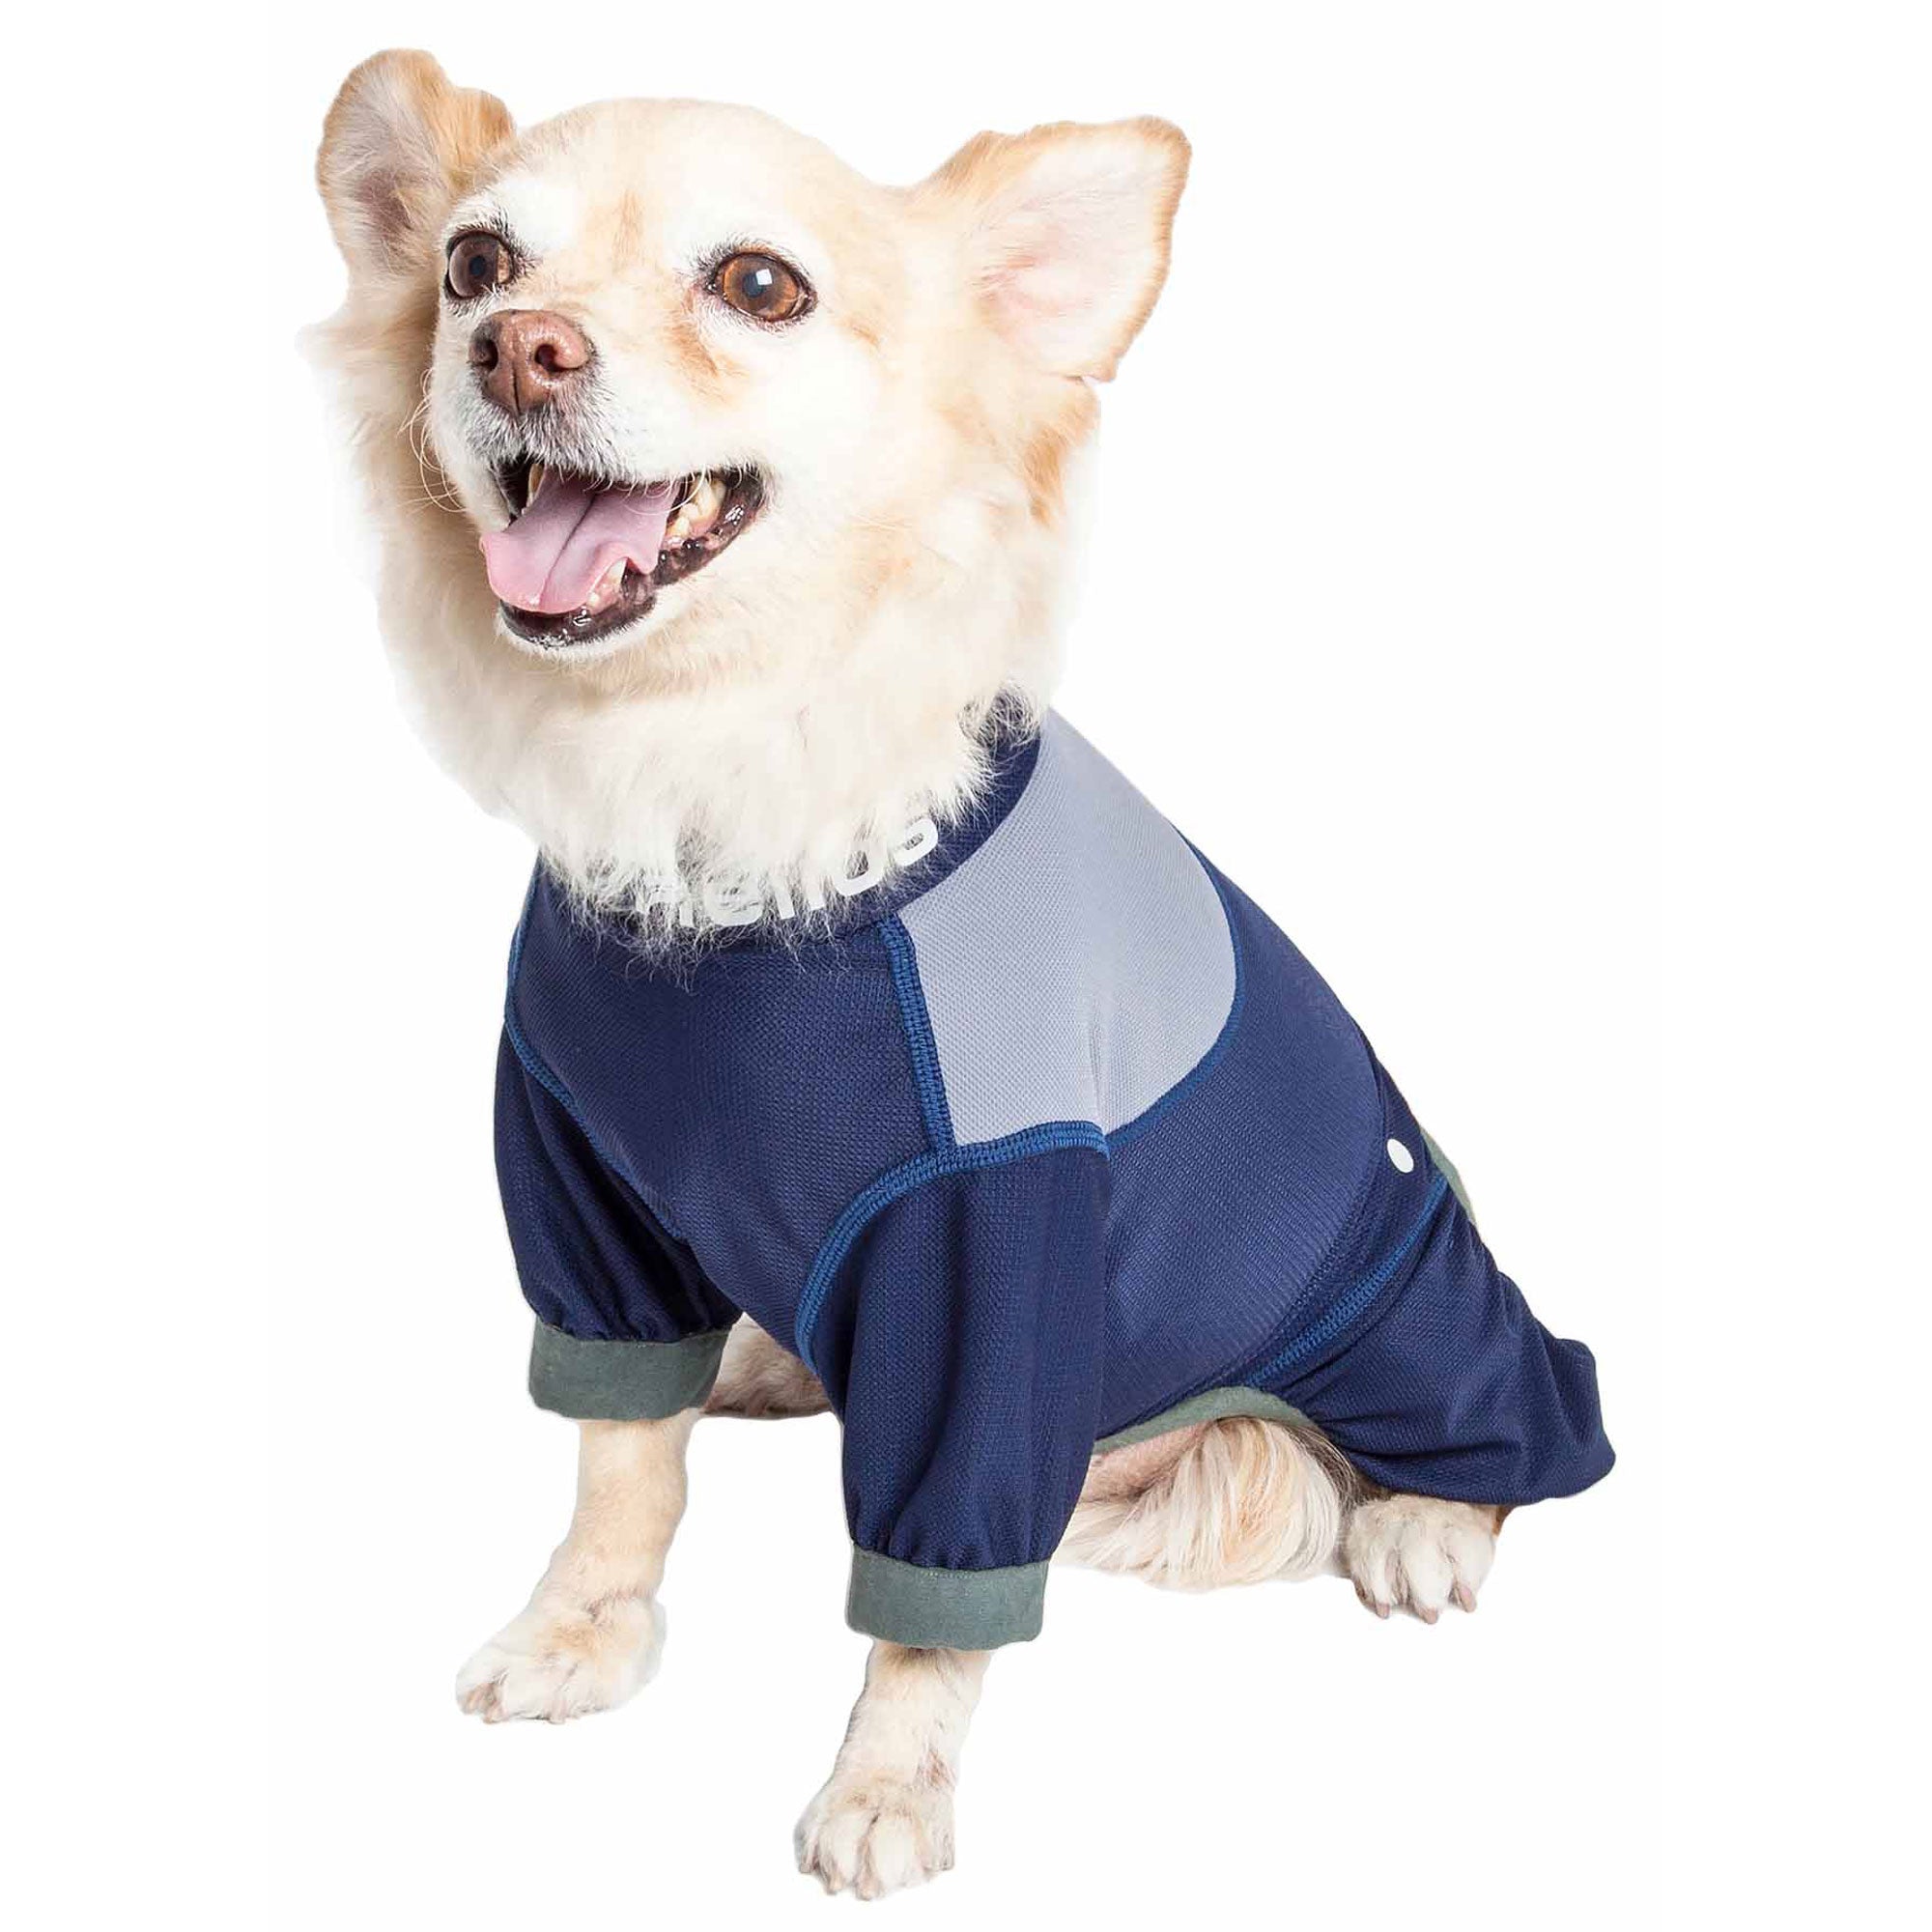 Dog Helios® Tail Runner Dog Track Suit - Blue & Gray - Large